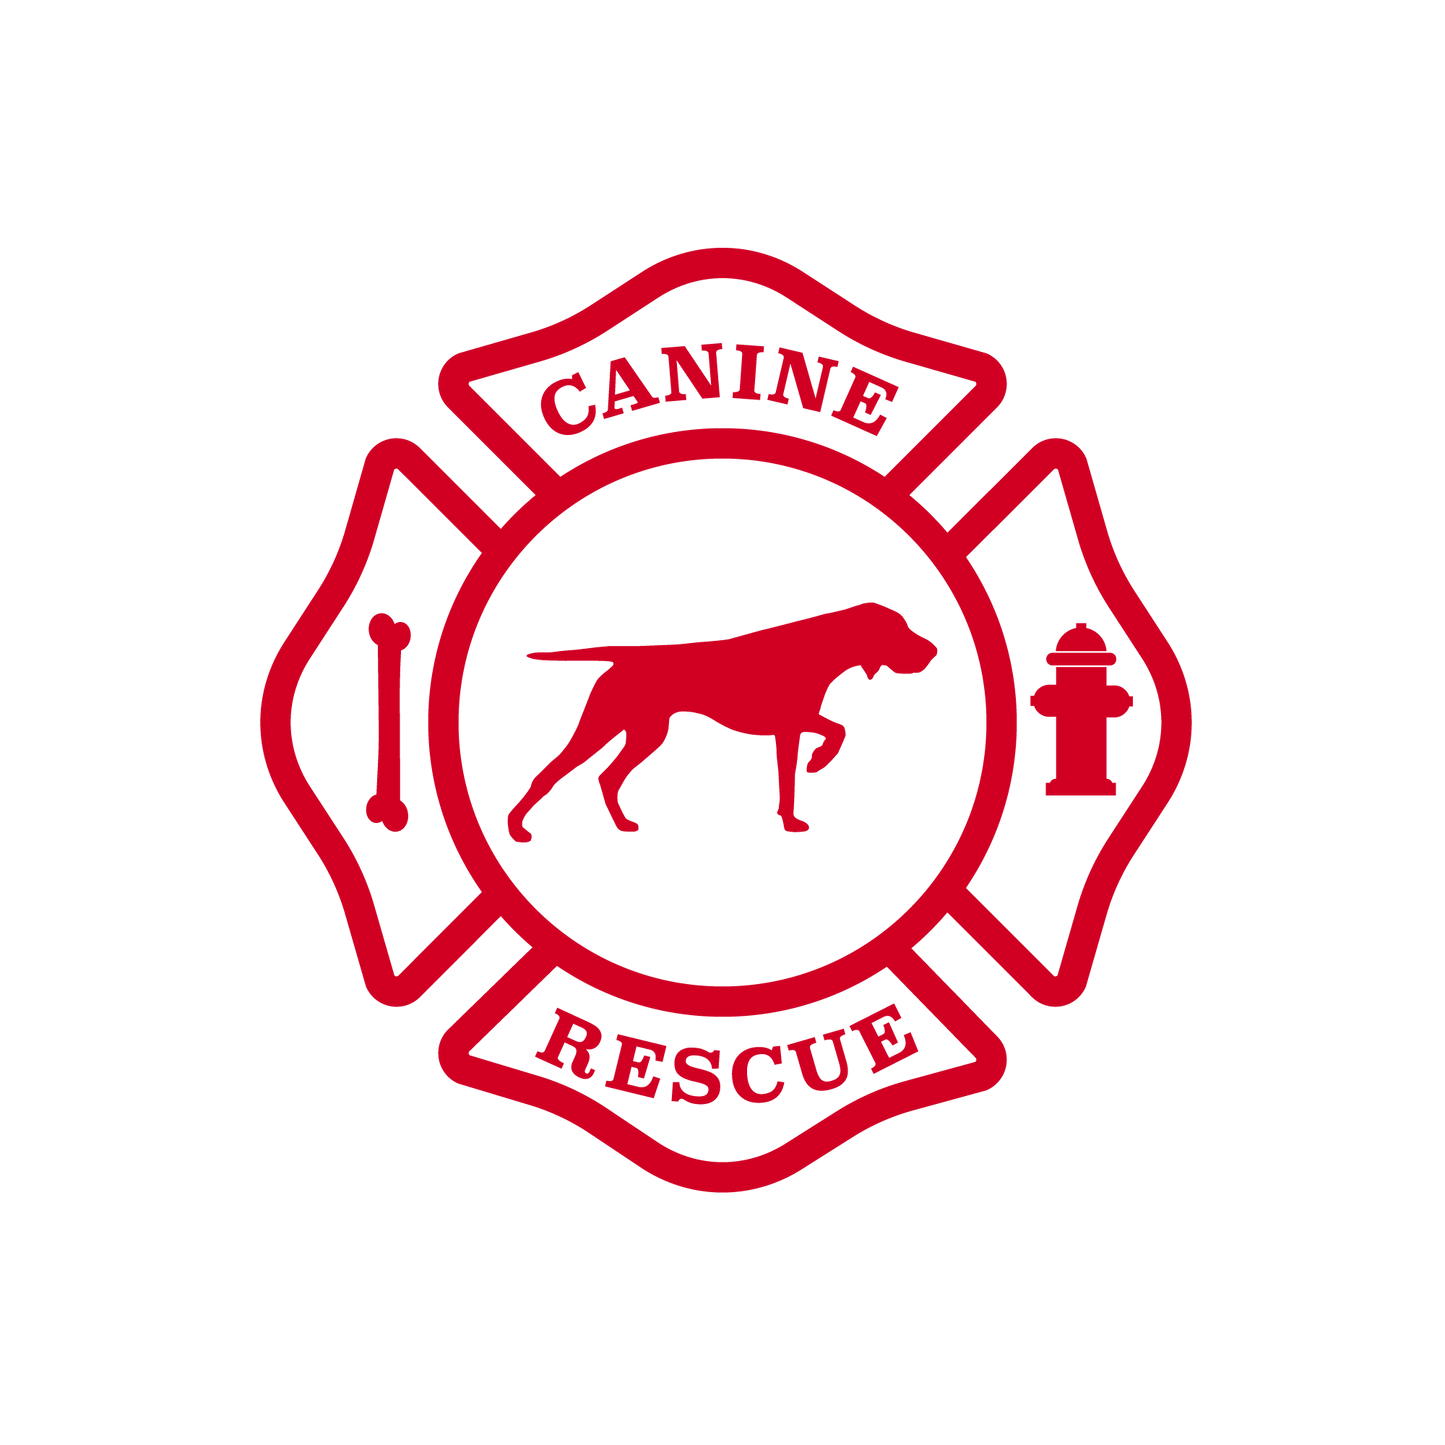 Canine Rescue T Shirt